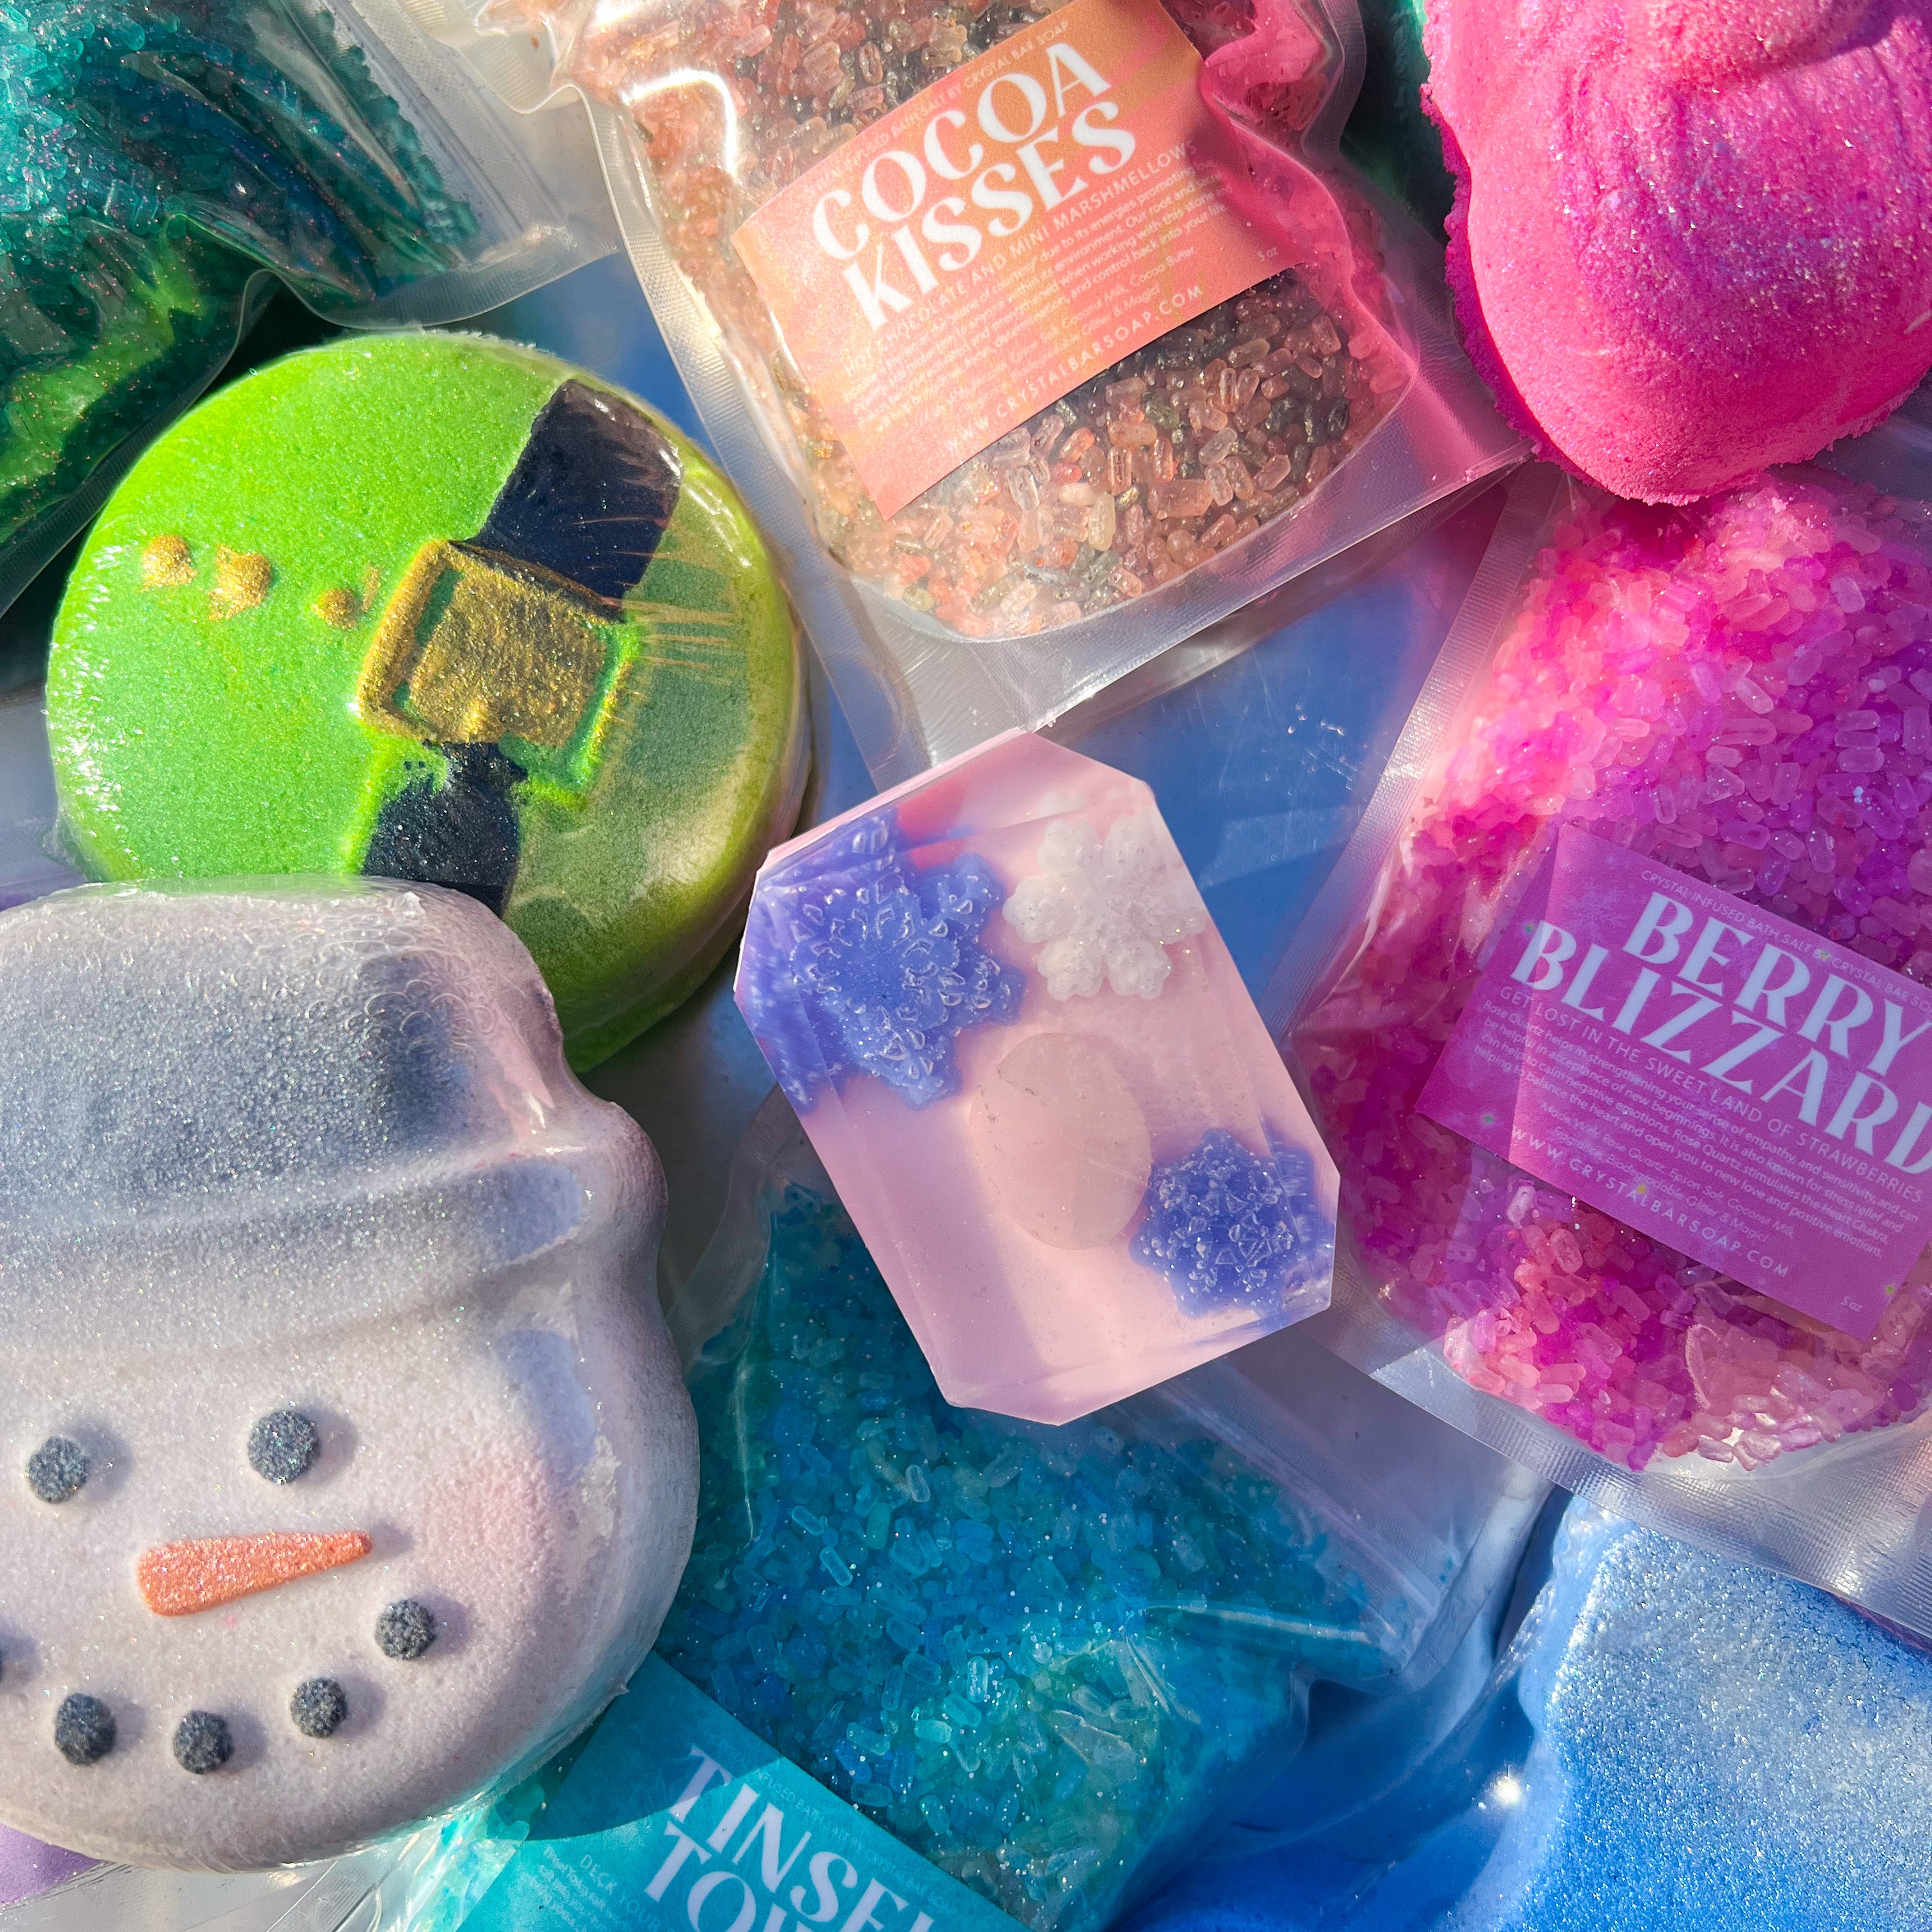 Glimmer and Glow: Enjoying the Holiday Season with Crystal Bar Soaps' Holiday Collection